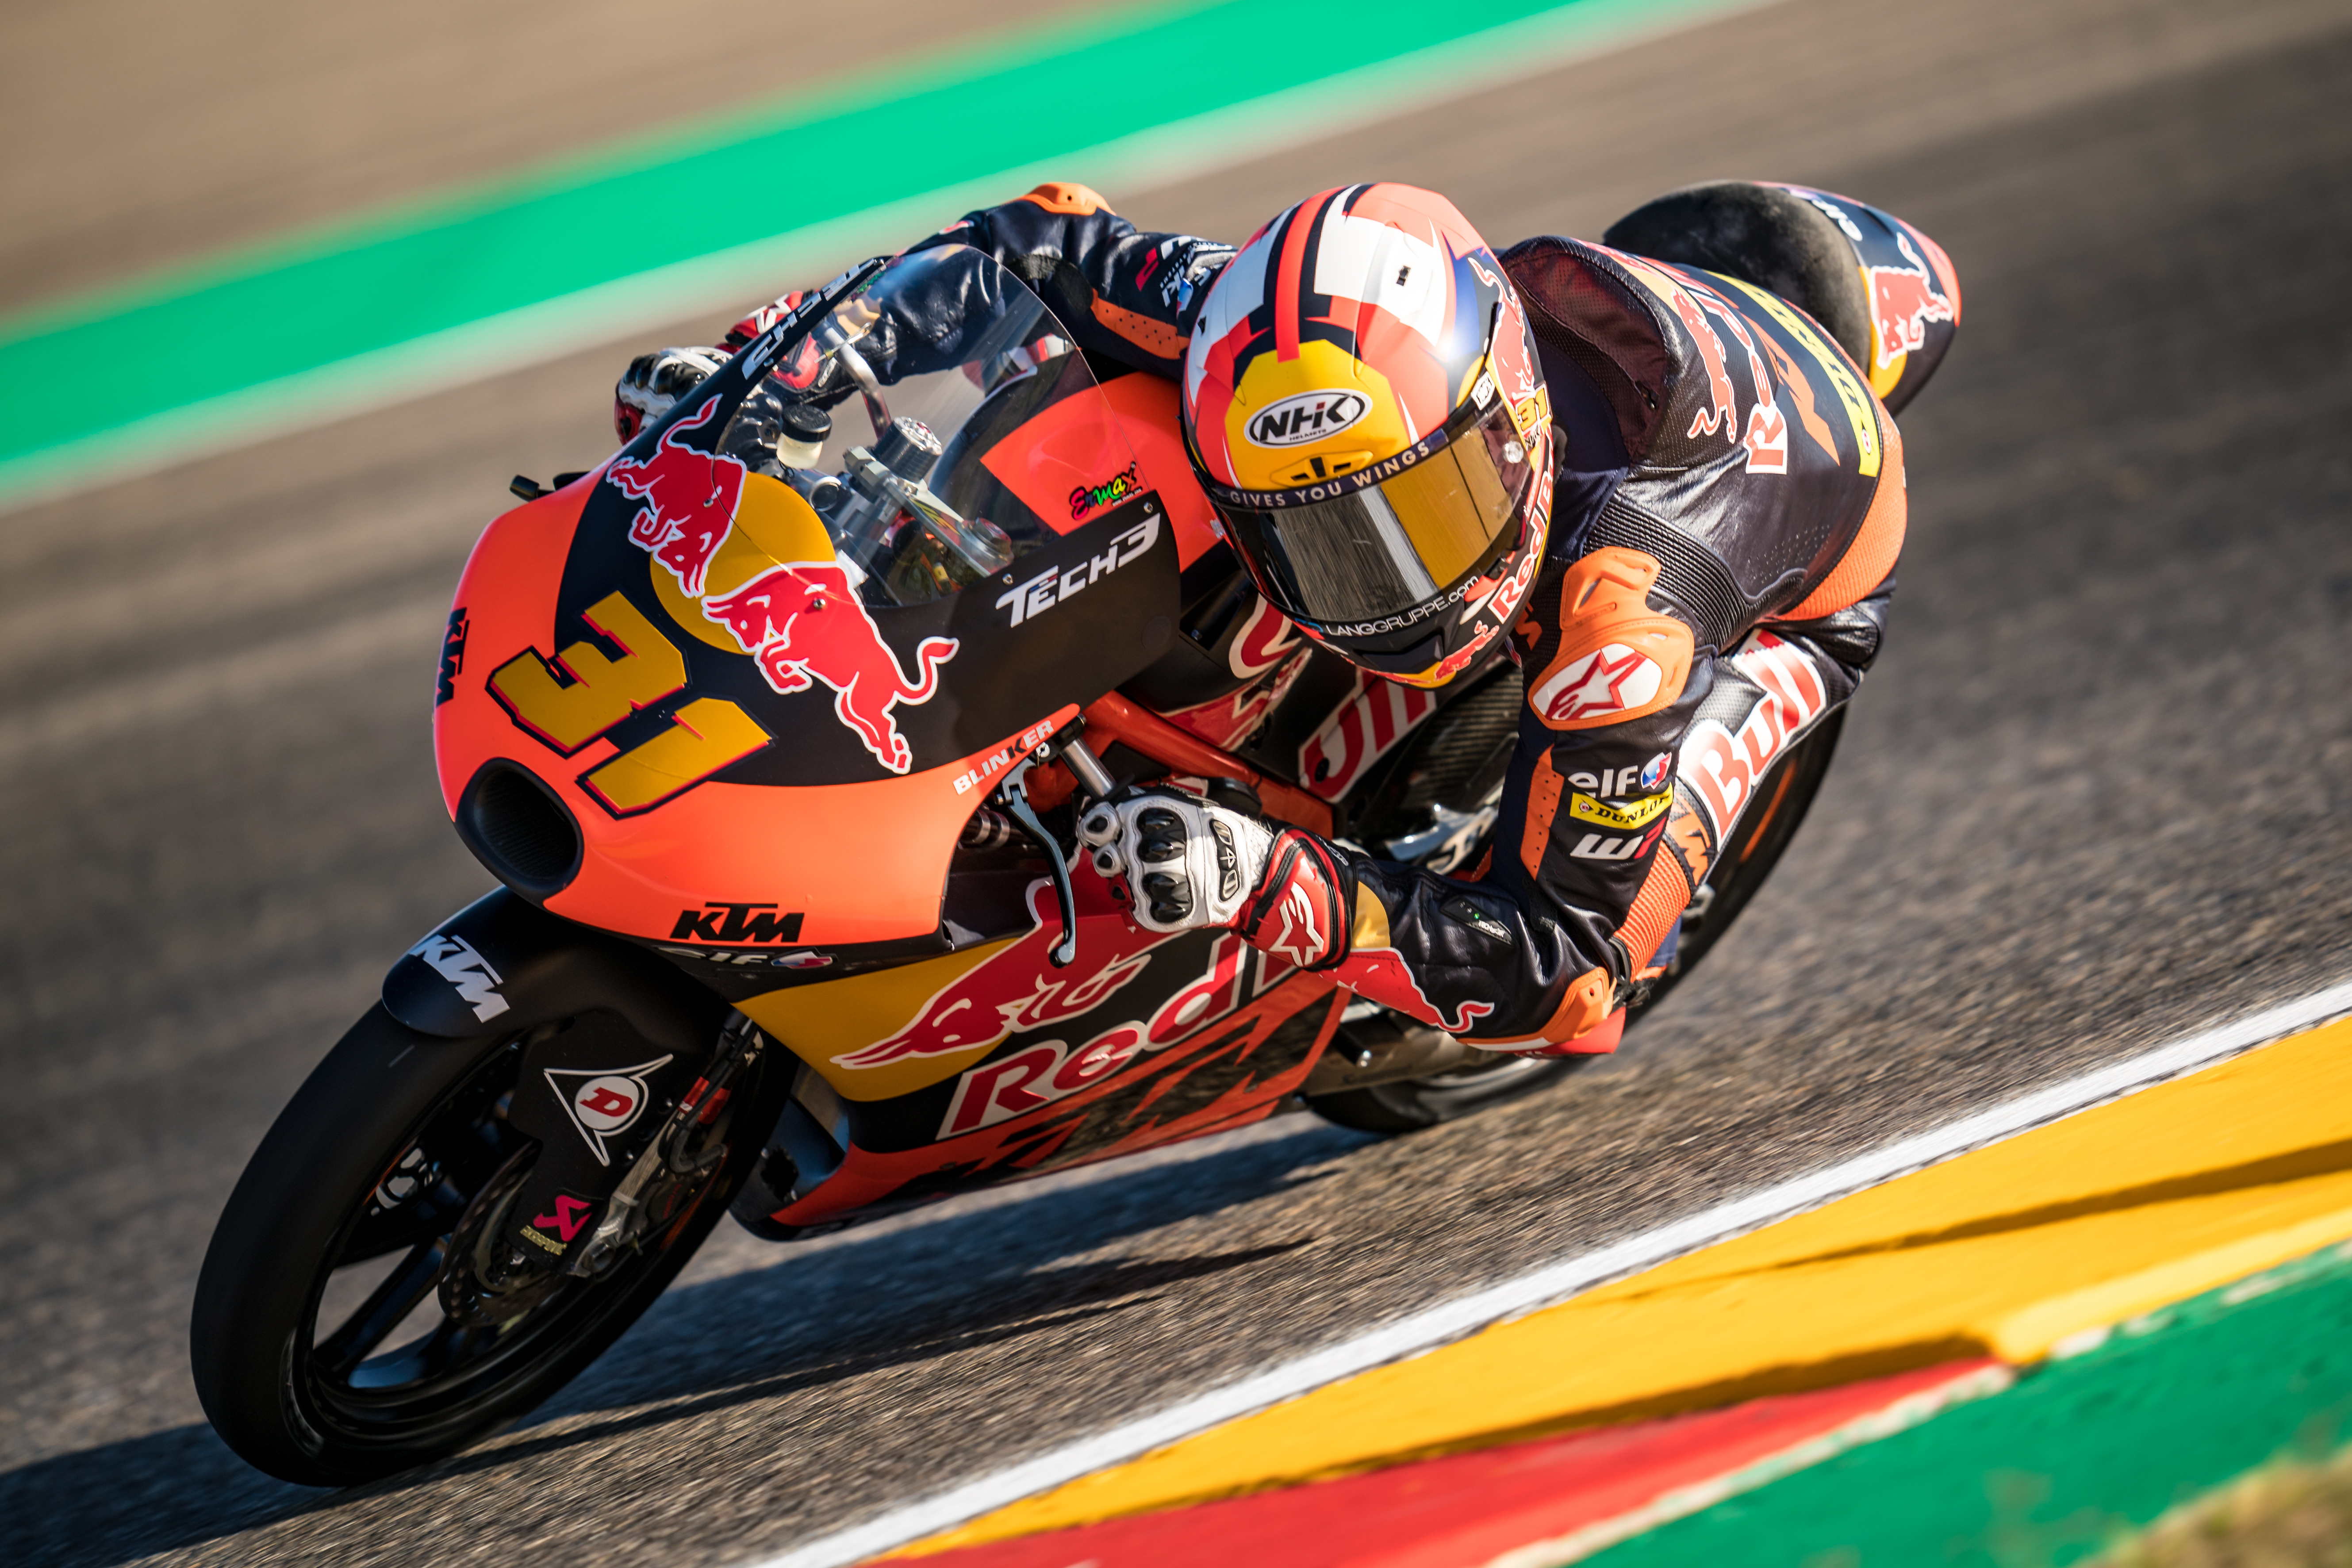 Moto3 rider Adrian Fernandez of Spain and Red Bull KTM Tech 3 rides during the free practice of the MotoGP Gran Premio Animoca Brands de Aragón at Motorland Aragon Circuit on September 16, 2022 in Alcaniz, Spain. (Photo by Steve Wobser/Getty Images)